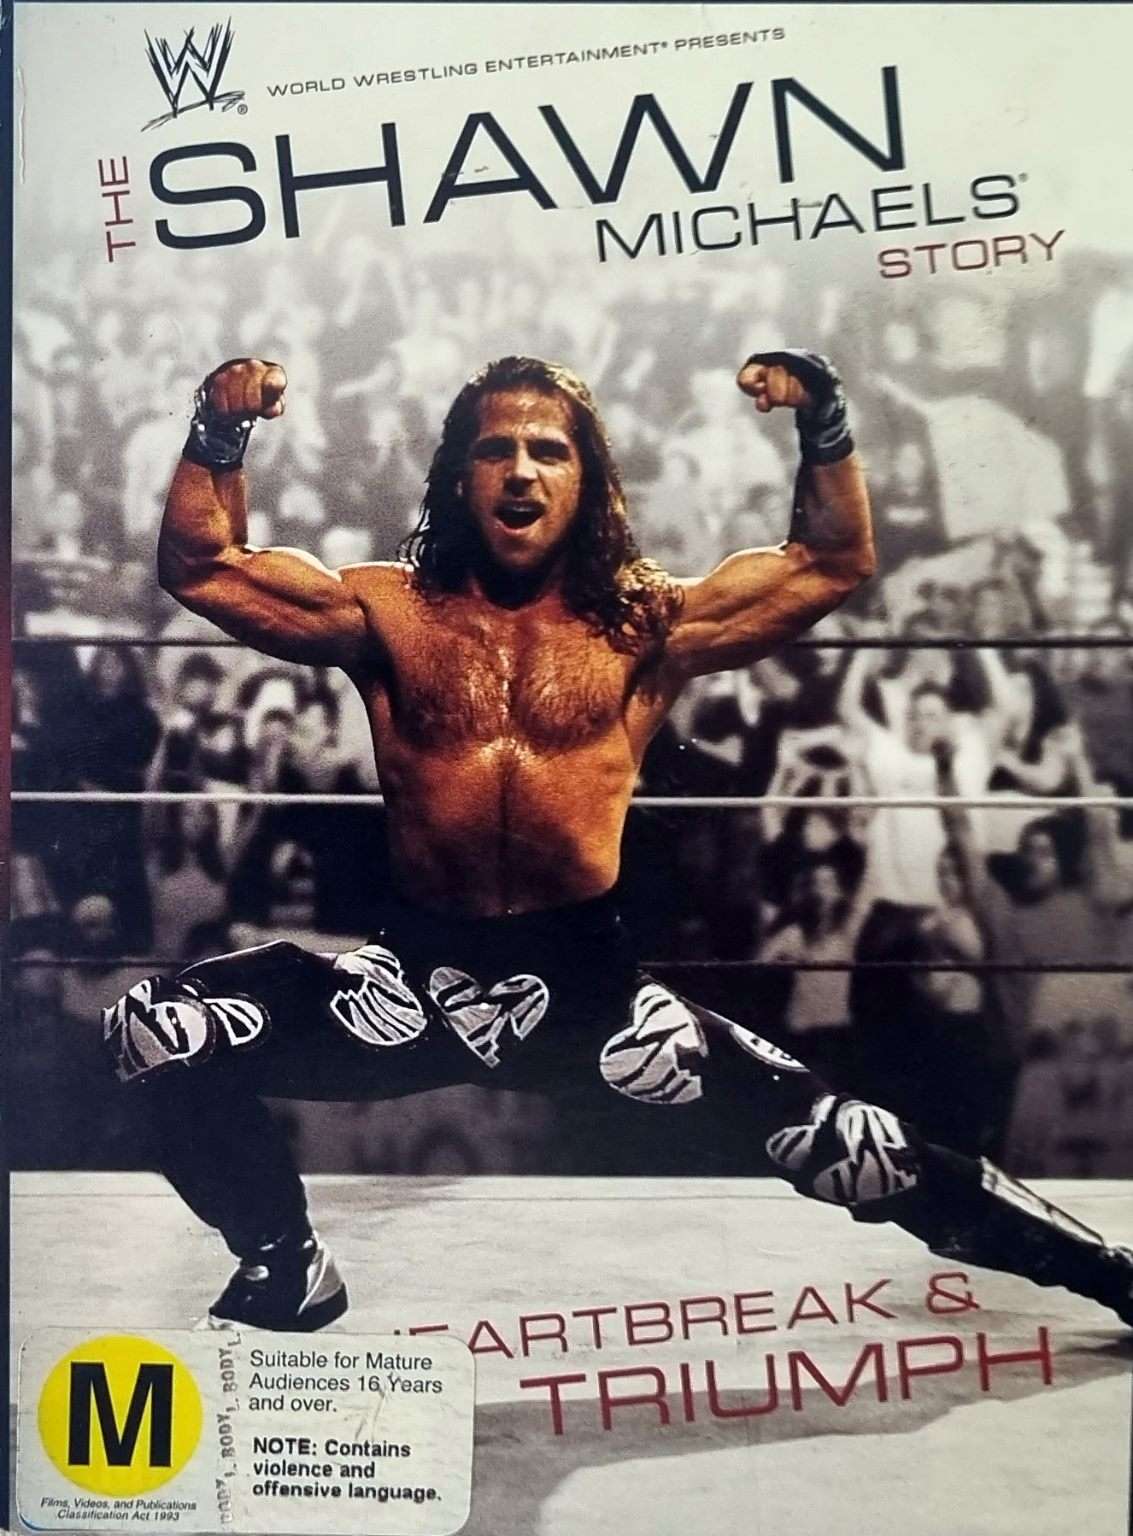 WWE: The Shawn Michaels Story - Heartbreak and Triumph 3 Disc Set